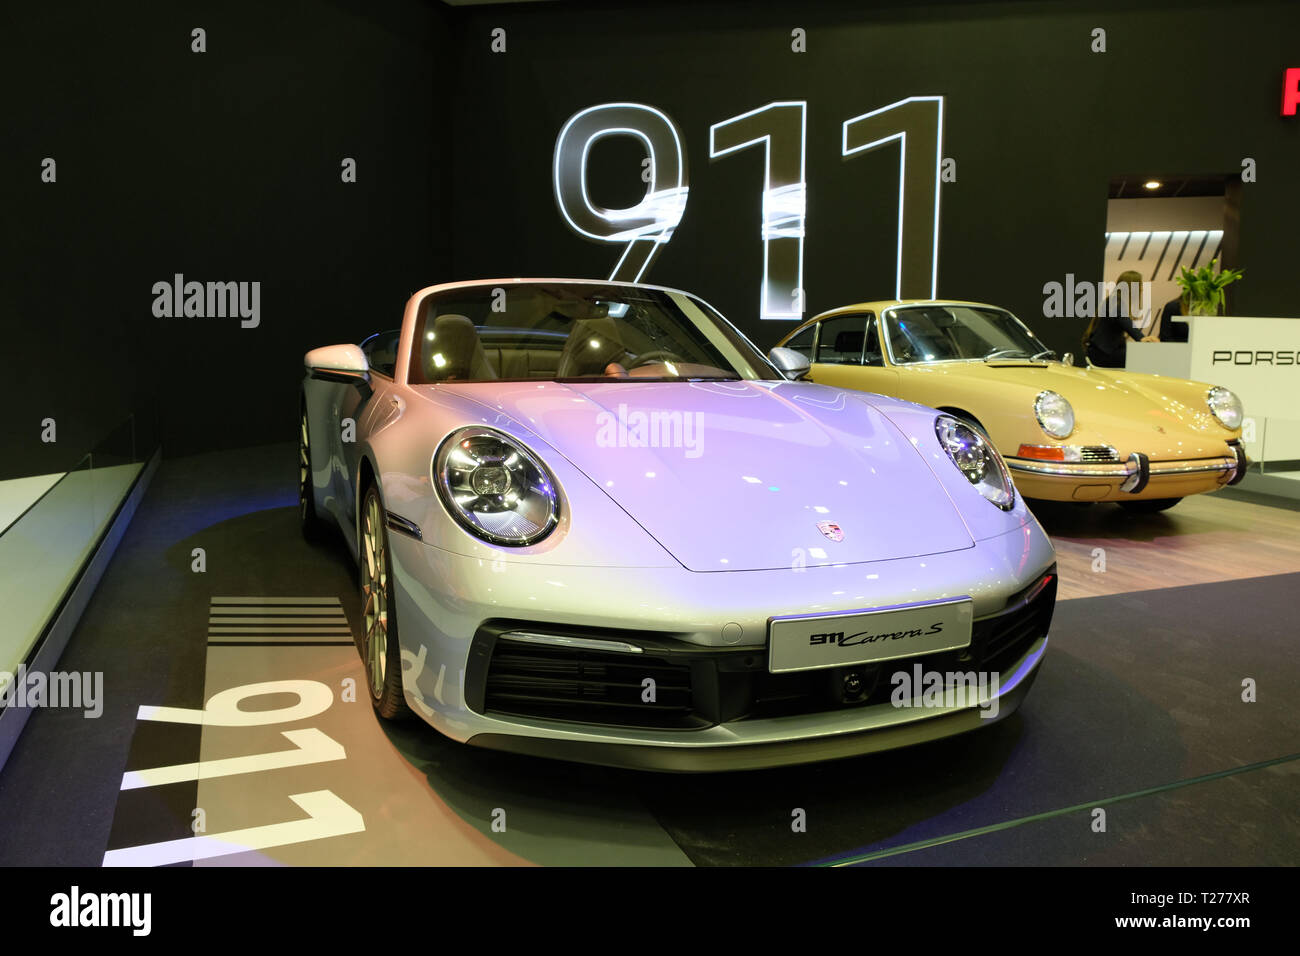 Poznan, Poland. 30th Mar, 2019. A Porsche 911 Carrera S is seen at the Poznan Motor Show 2019 in Poznan, Poland, on March 30, 2019. The Poznan Motor Show 2019, with the participation of 170 automobile manufacturers, is held from March 28 to March 31 in Poznan. Credit: Zhou Nan/Xinhua/Alamy Live News Stock Photo